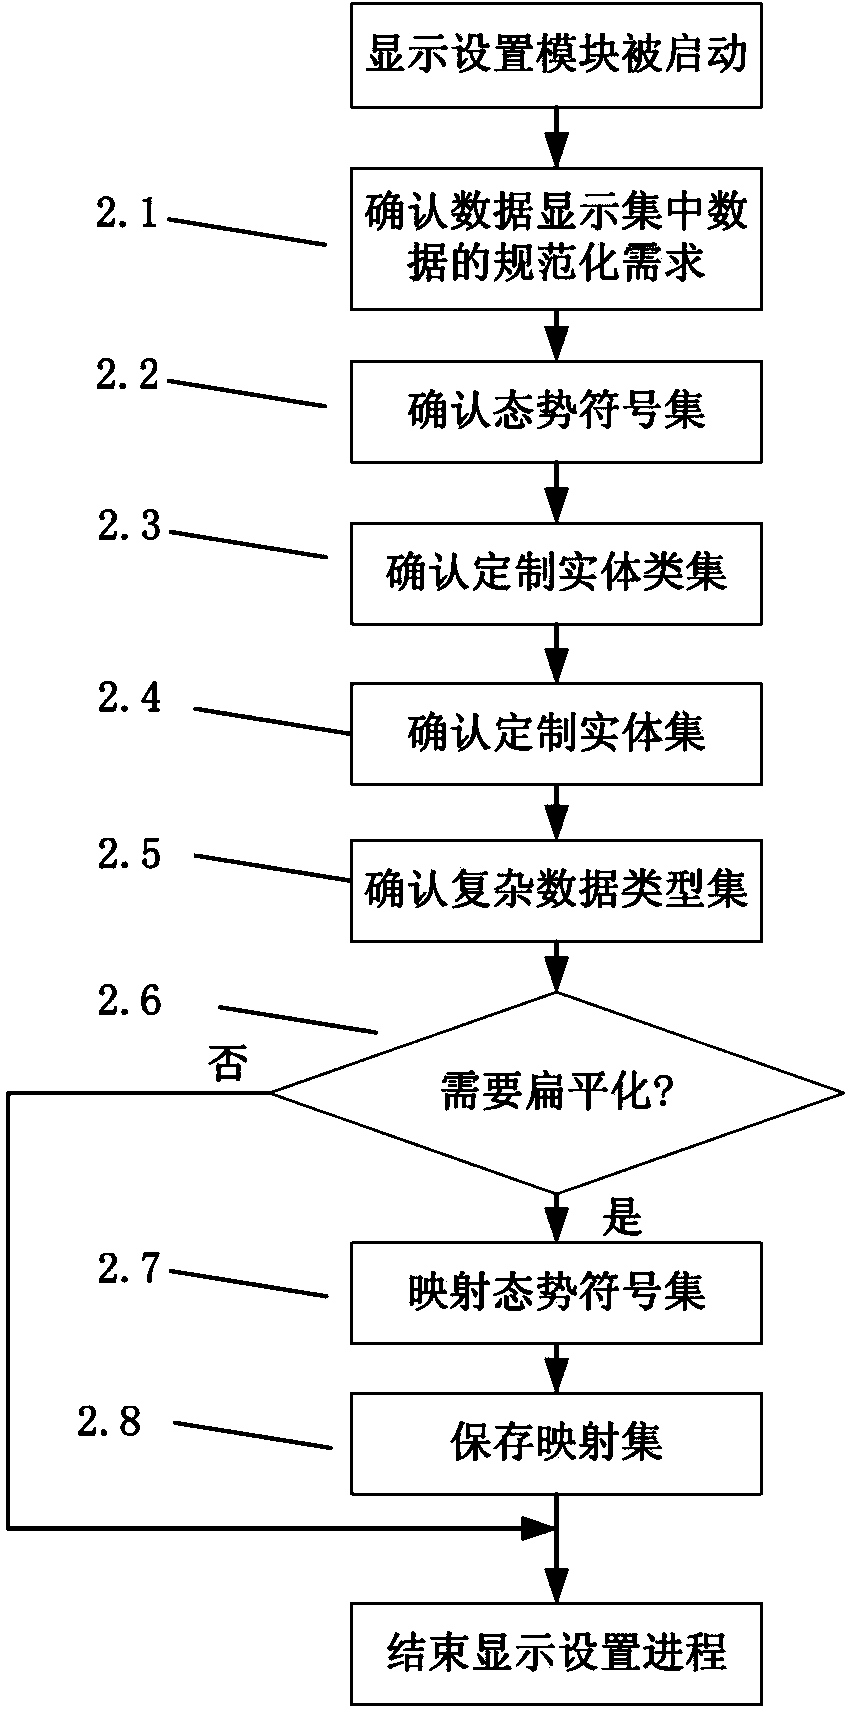 Method and device for displaying general artificial social situation based on data flow mapping